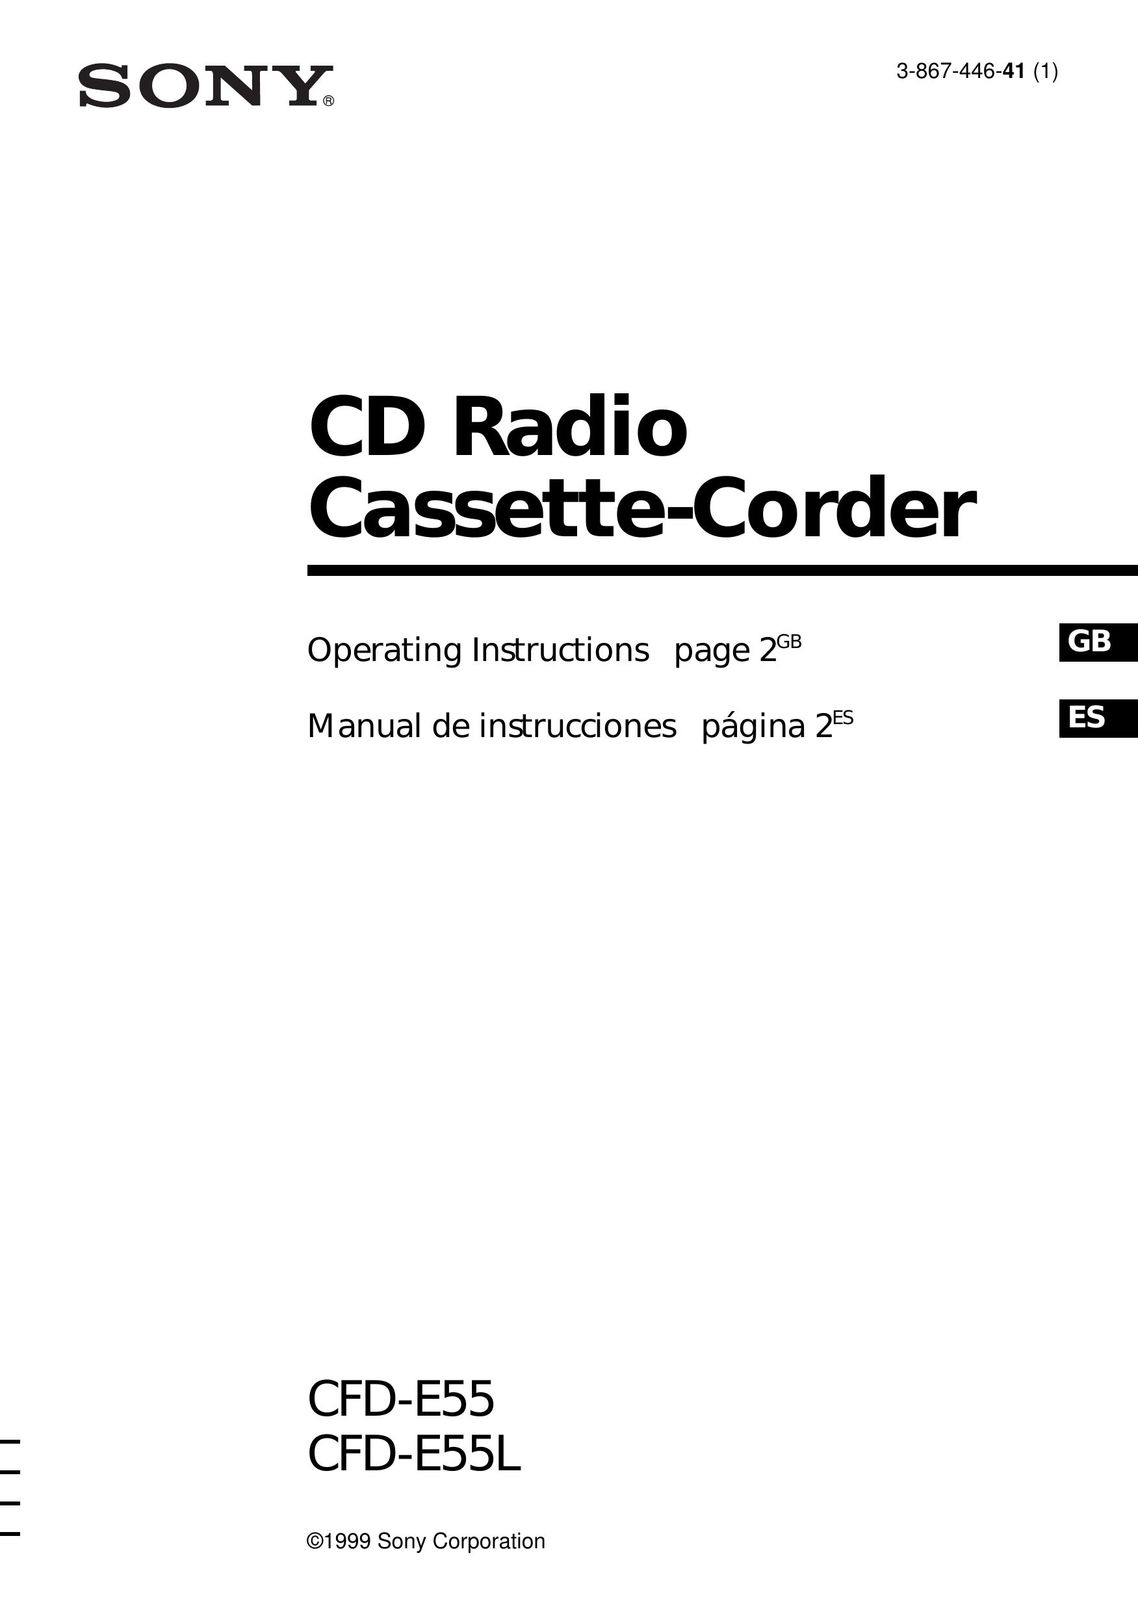 Sony CFD-E55L Cassette Player User Manual